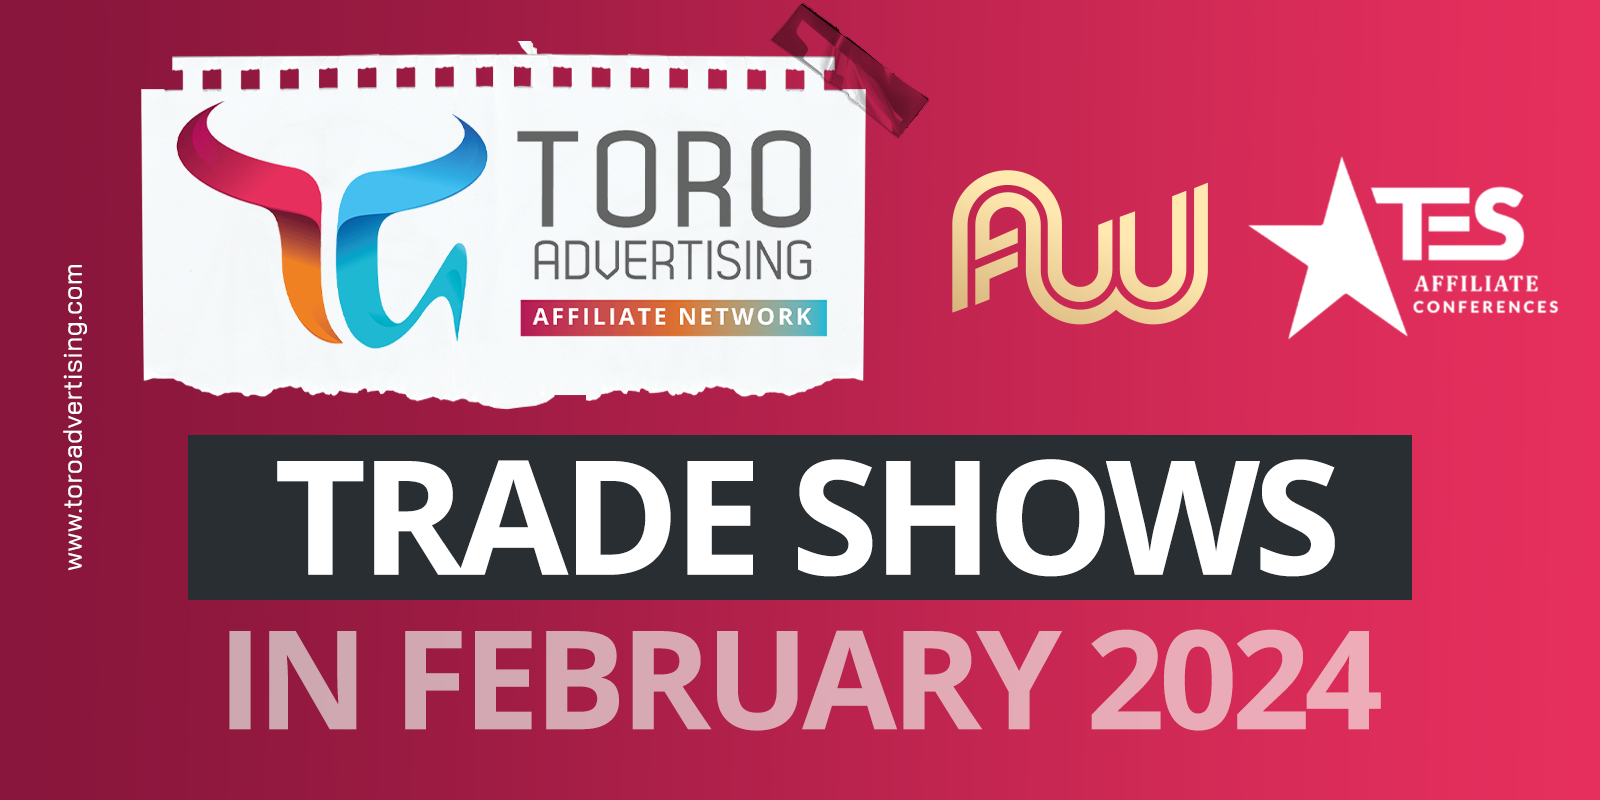 TORO Advertising Trade shows in February